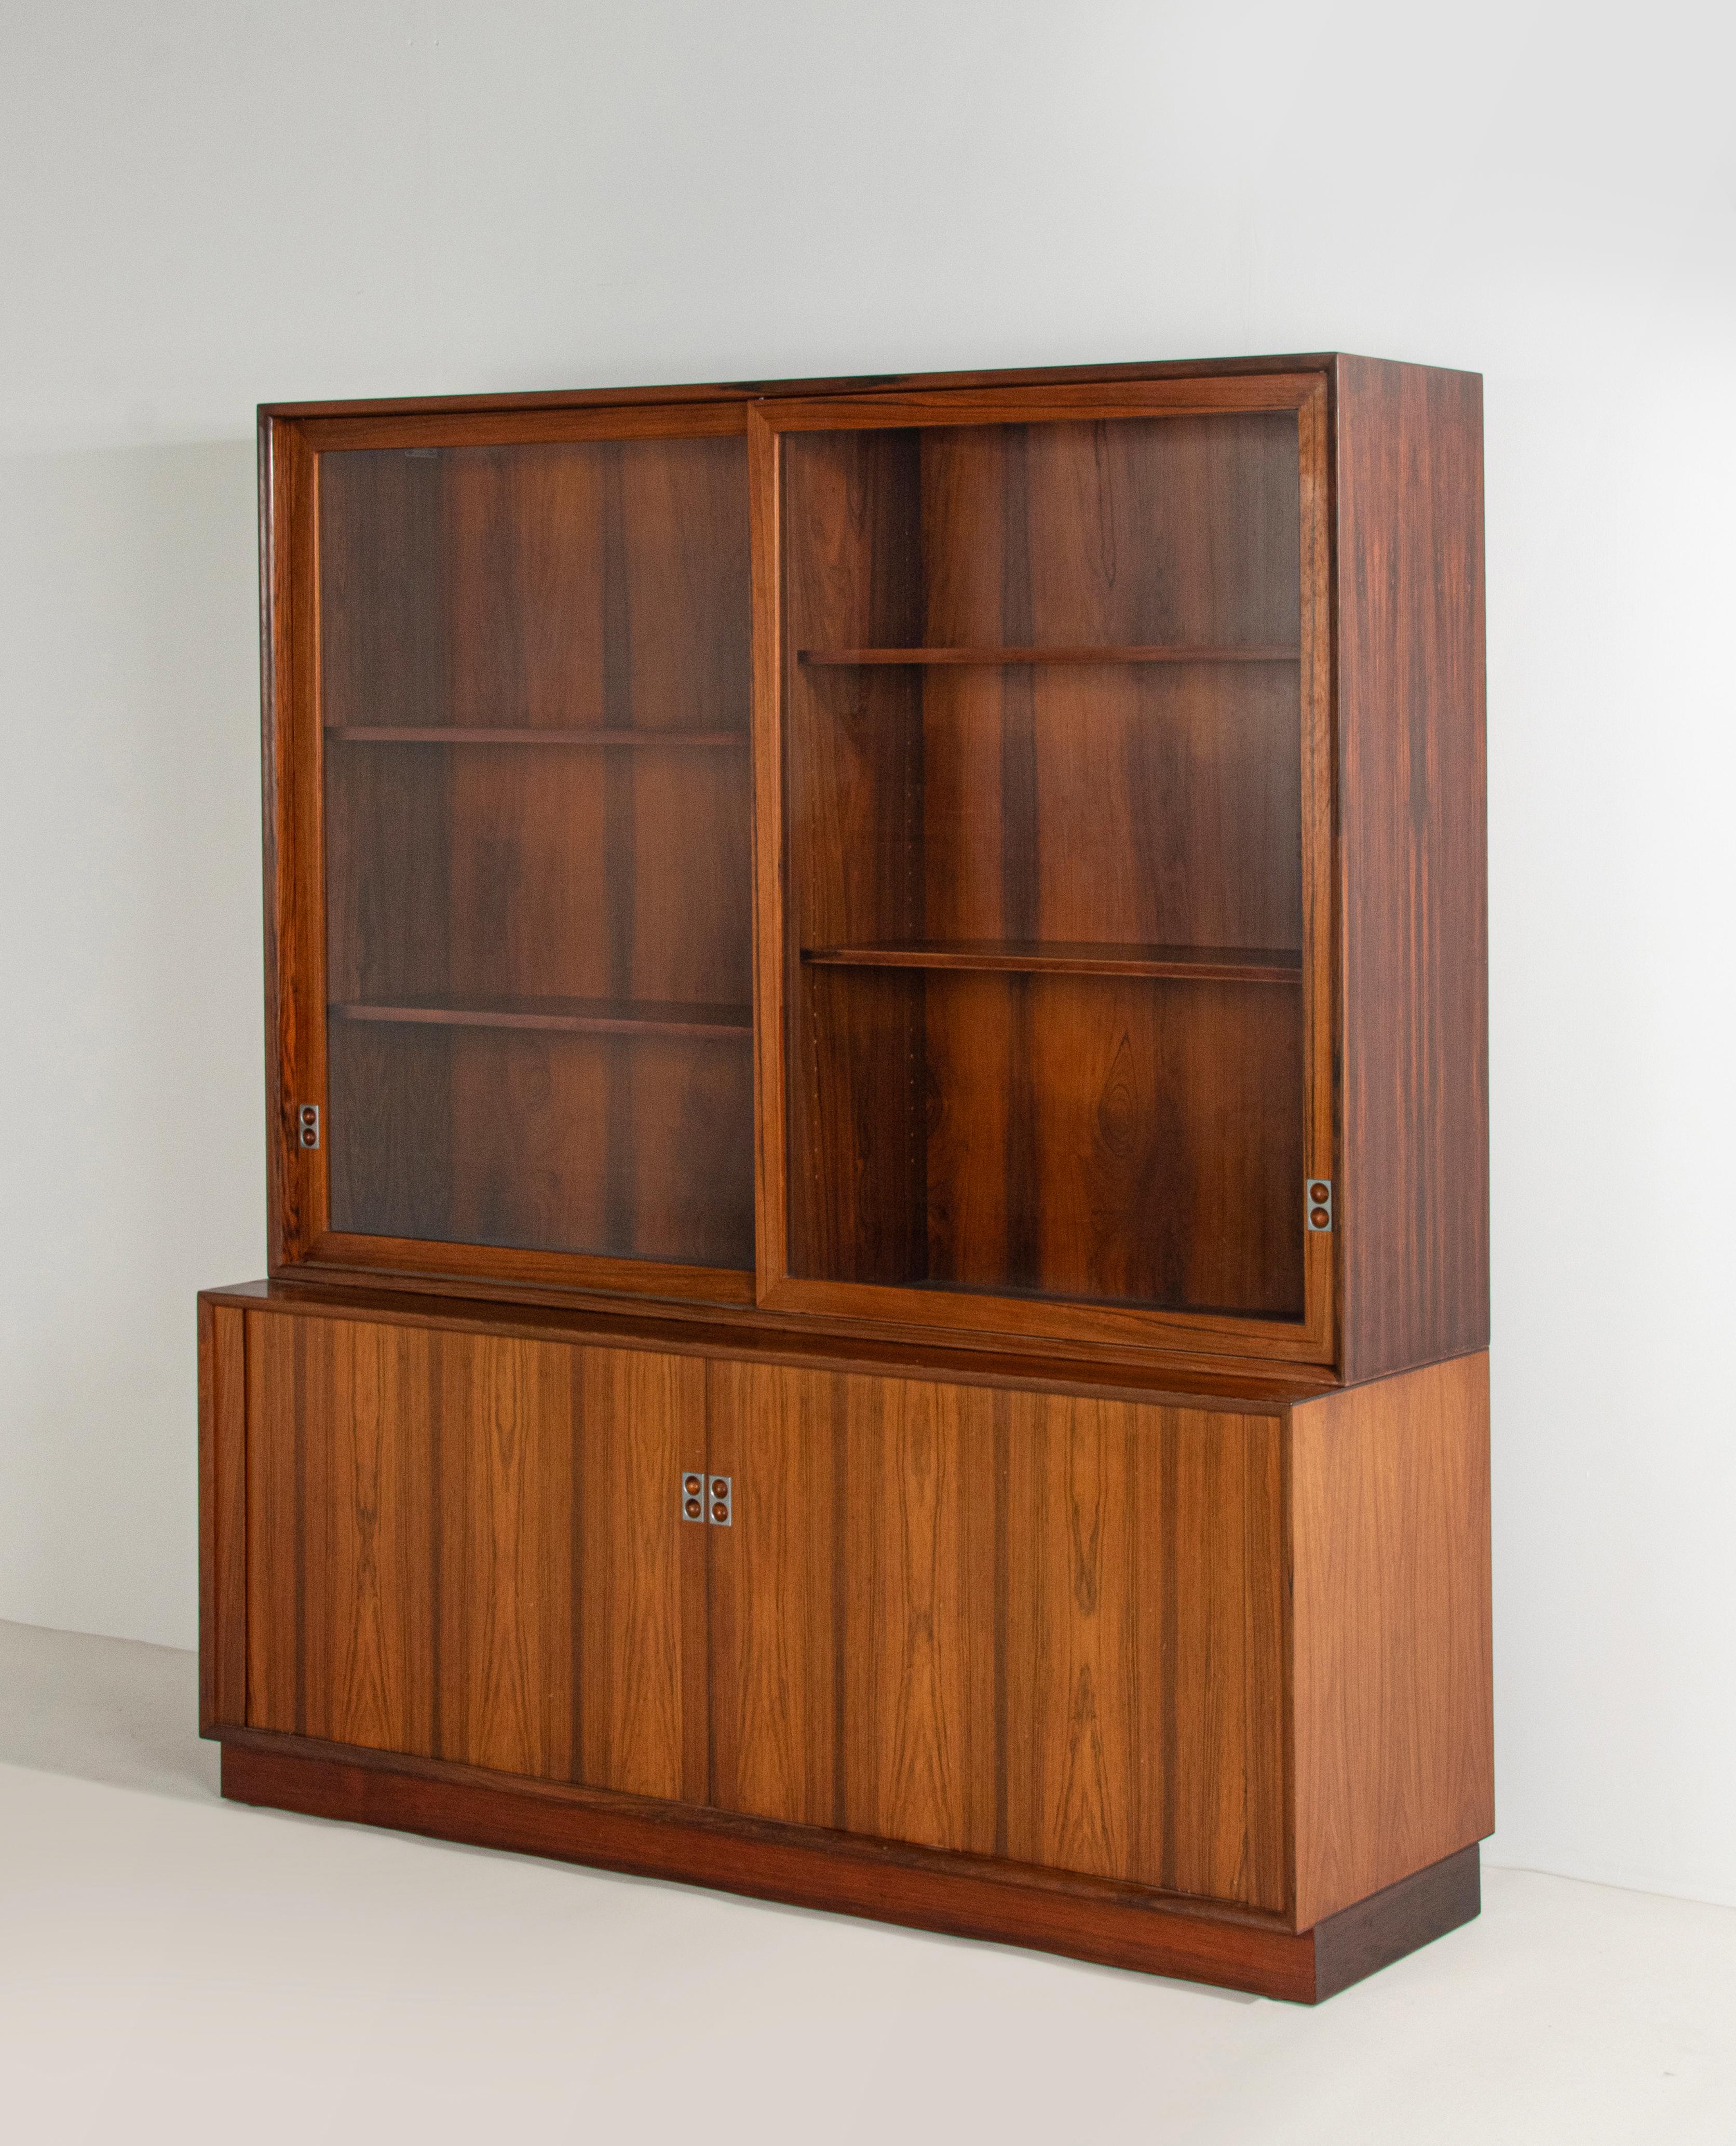 A Mid-Century Modern veneered bookcase with spacious interior. Sliding glass doors with metal handles. The base part has two tambour sliding doors, with two extra drawers. The design is by Arne Vodder, made by Sibast Møbler. All doors opens